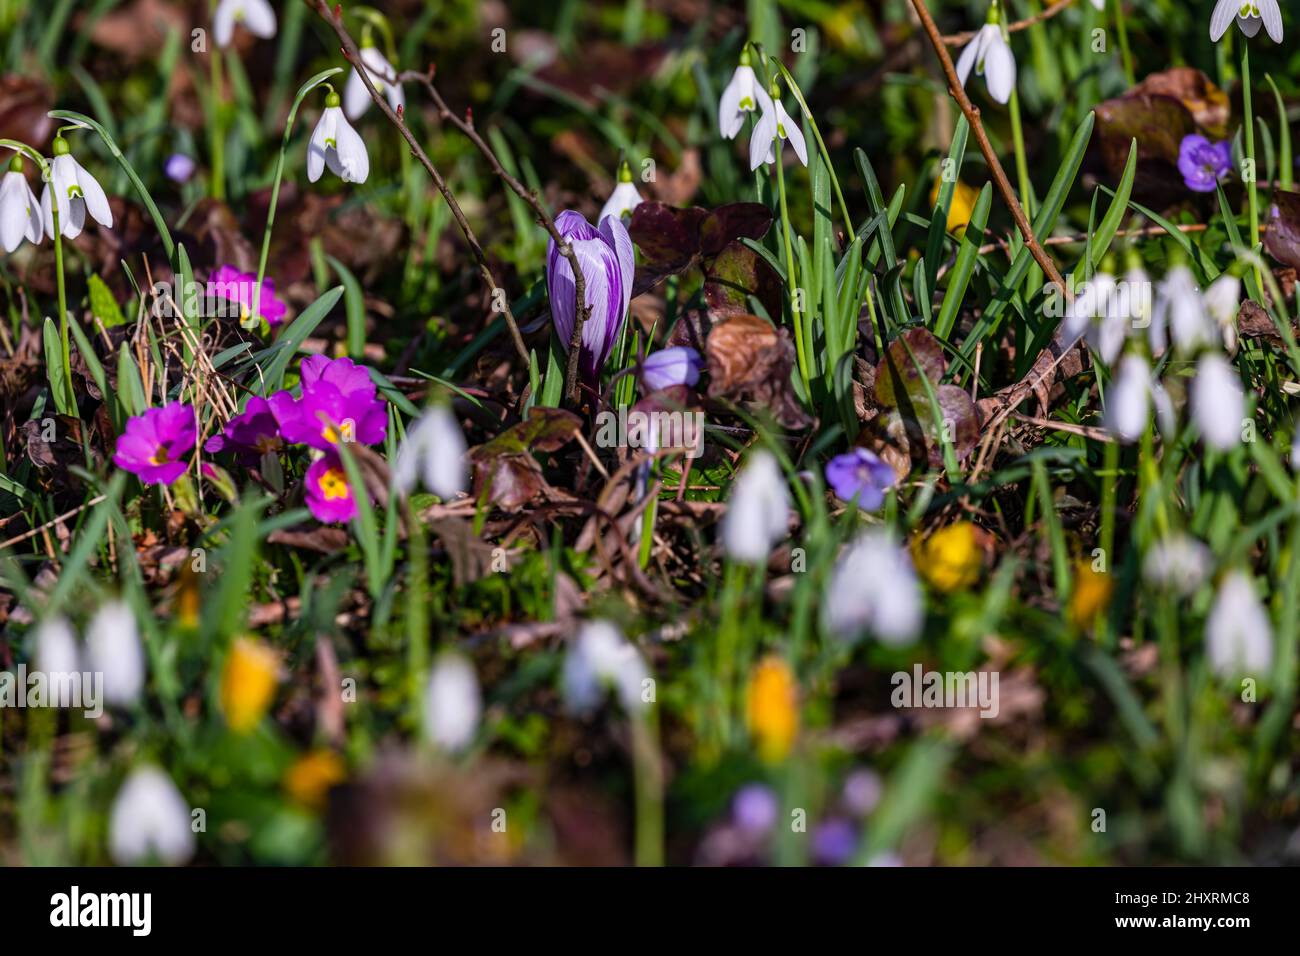 Primroses, snowdrops and crocuses indicate spring as early bloomers between shrubs Stock Photo